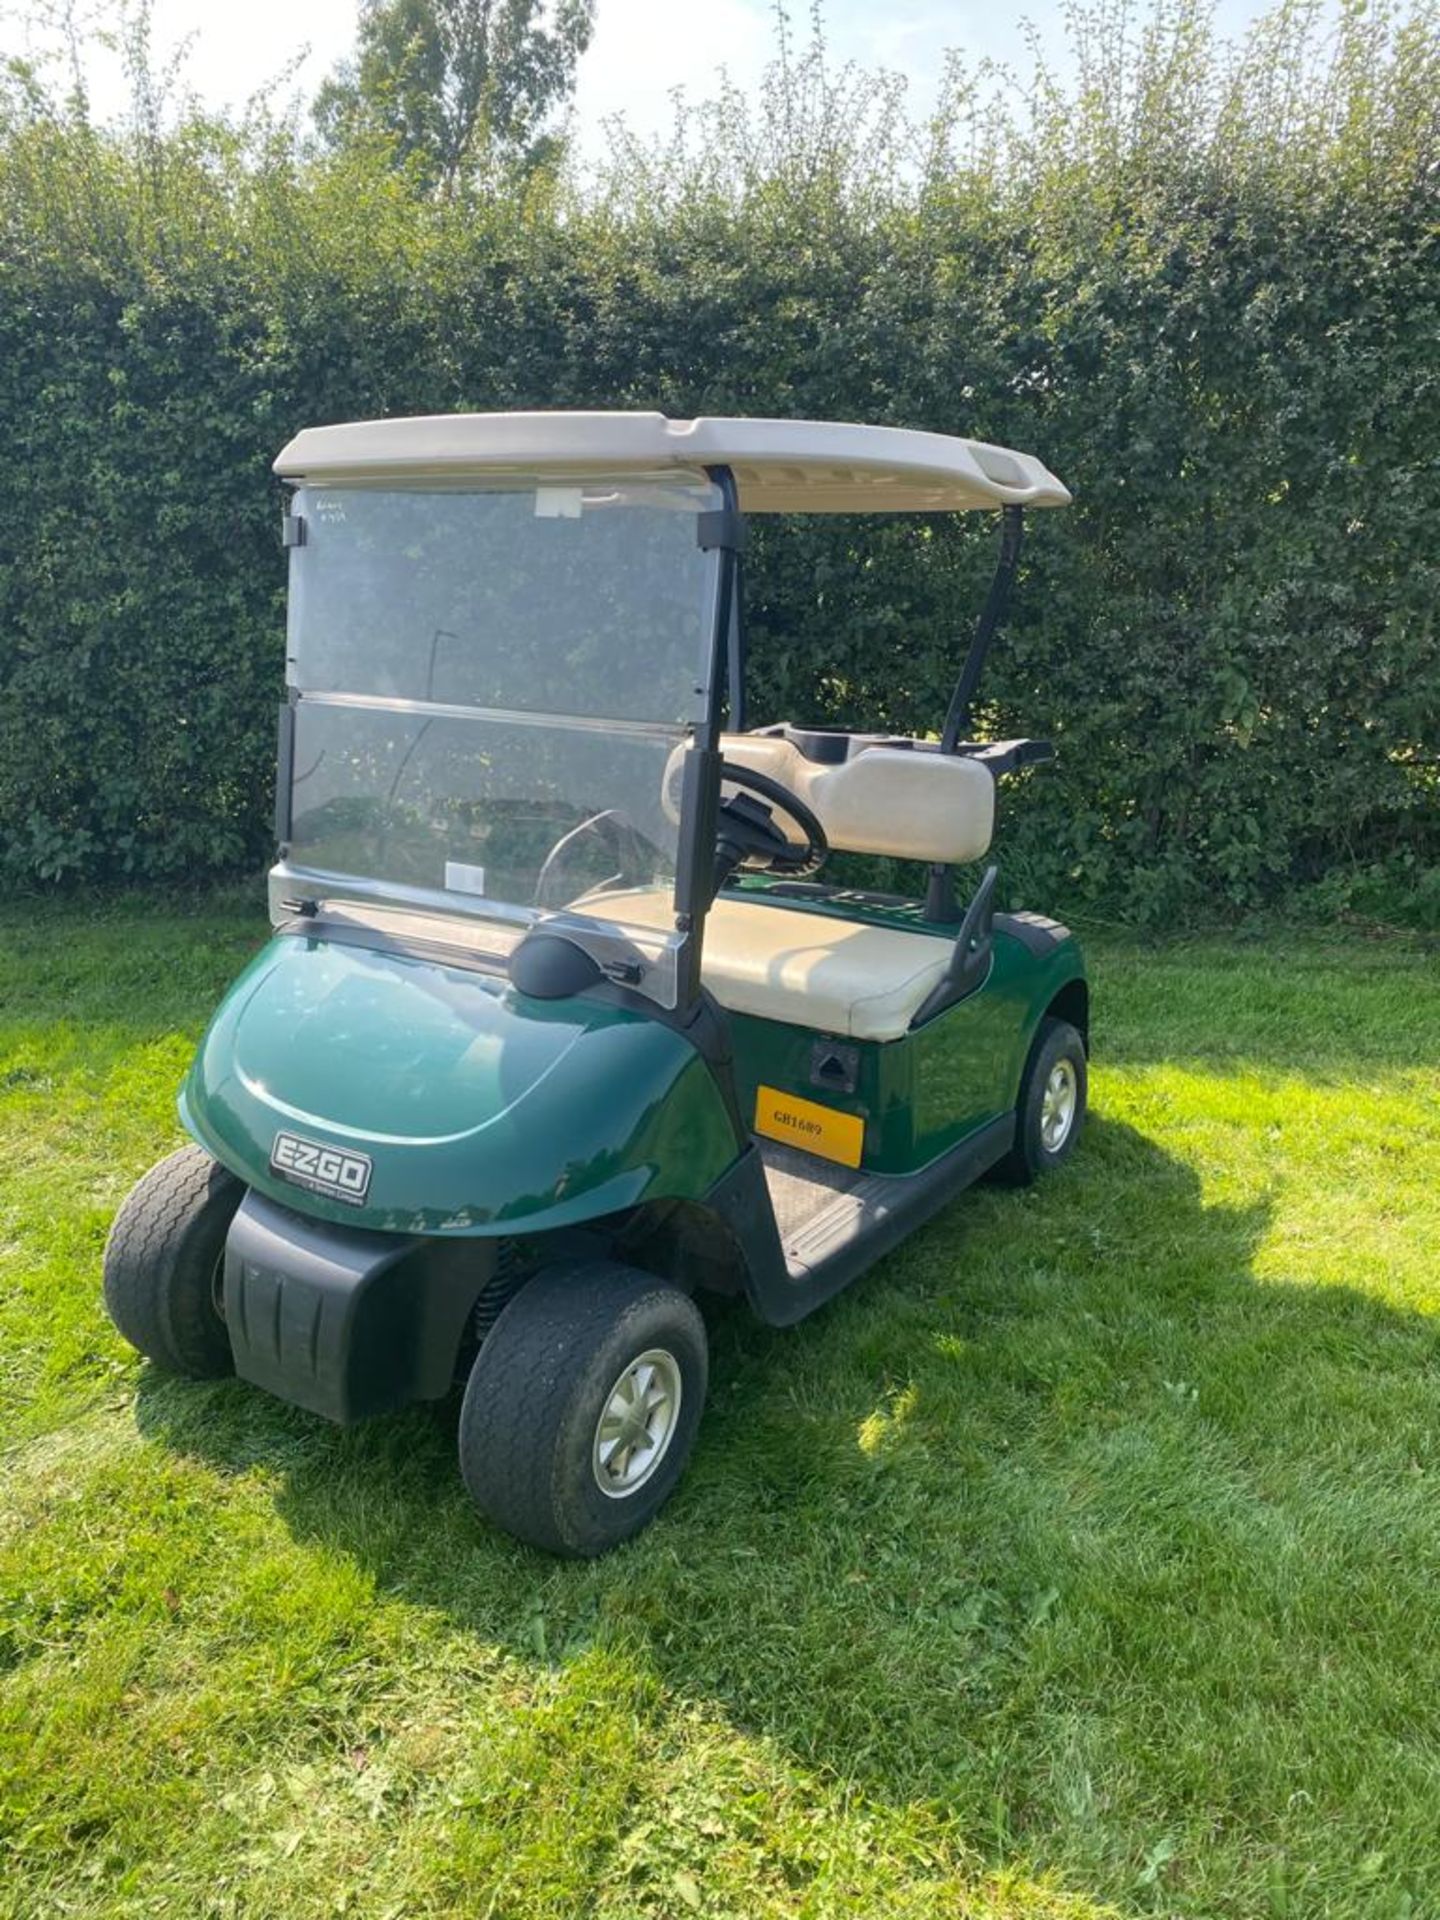 EZGO ELECTRIC GOLF BUGGY, FULL SUN CANOPY, YEAR 03/17, IN LOVELY CONDITION *PLUS VAT* - Image 4 of 5